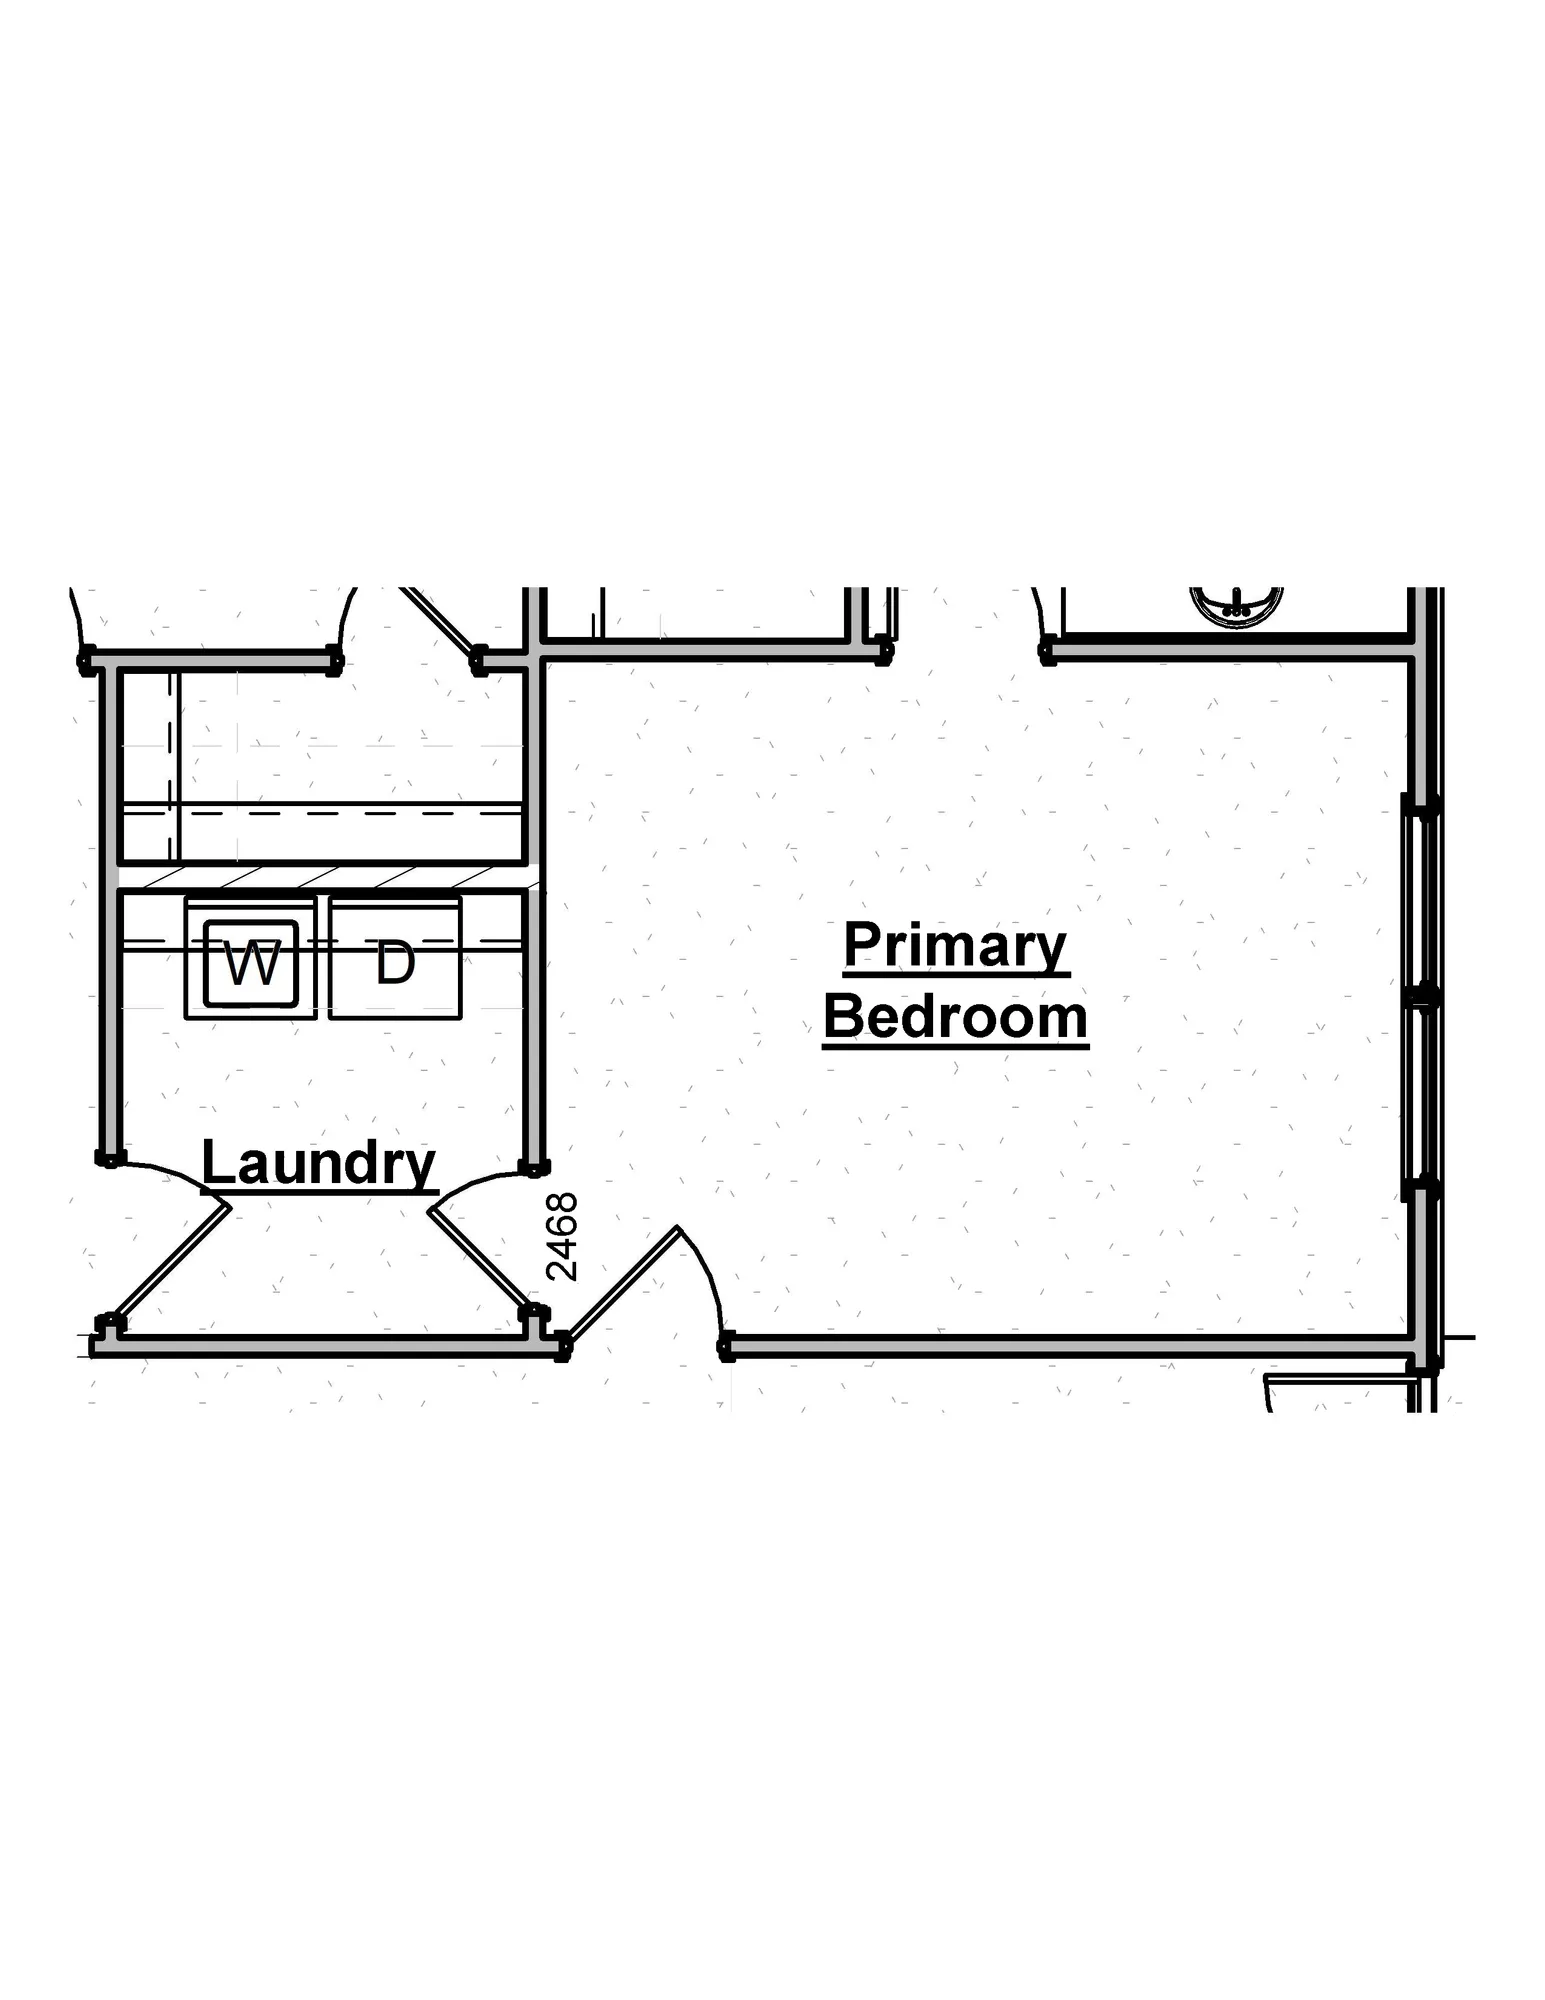 Laundry Room Access - undefined